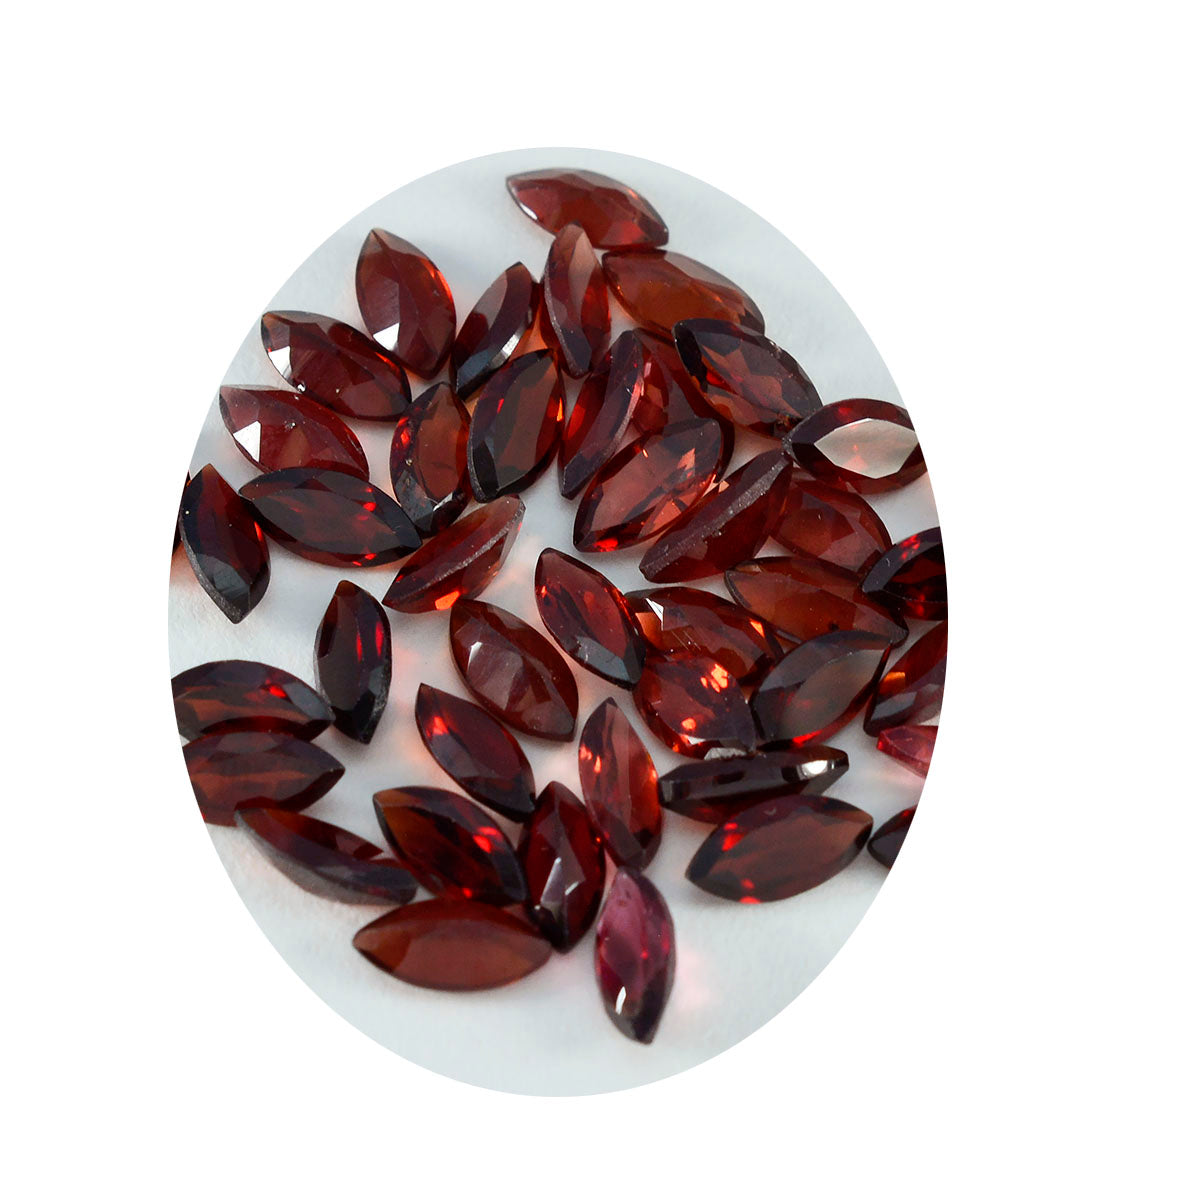 Riyogems 1PC Real Red Garnet Faceted 3x6 mm Marquise Shape sweet Quality Loose Stone